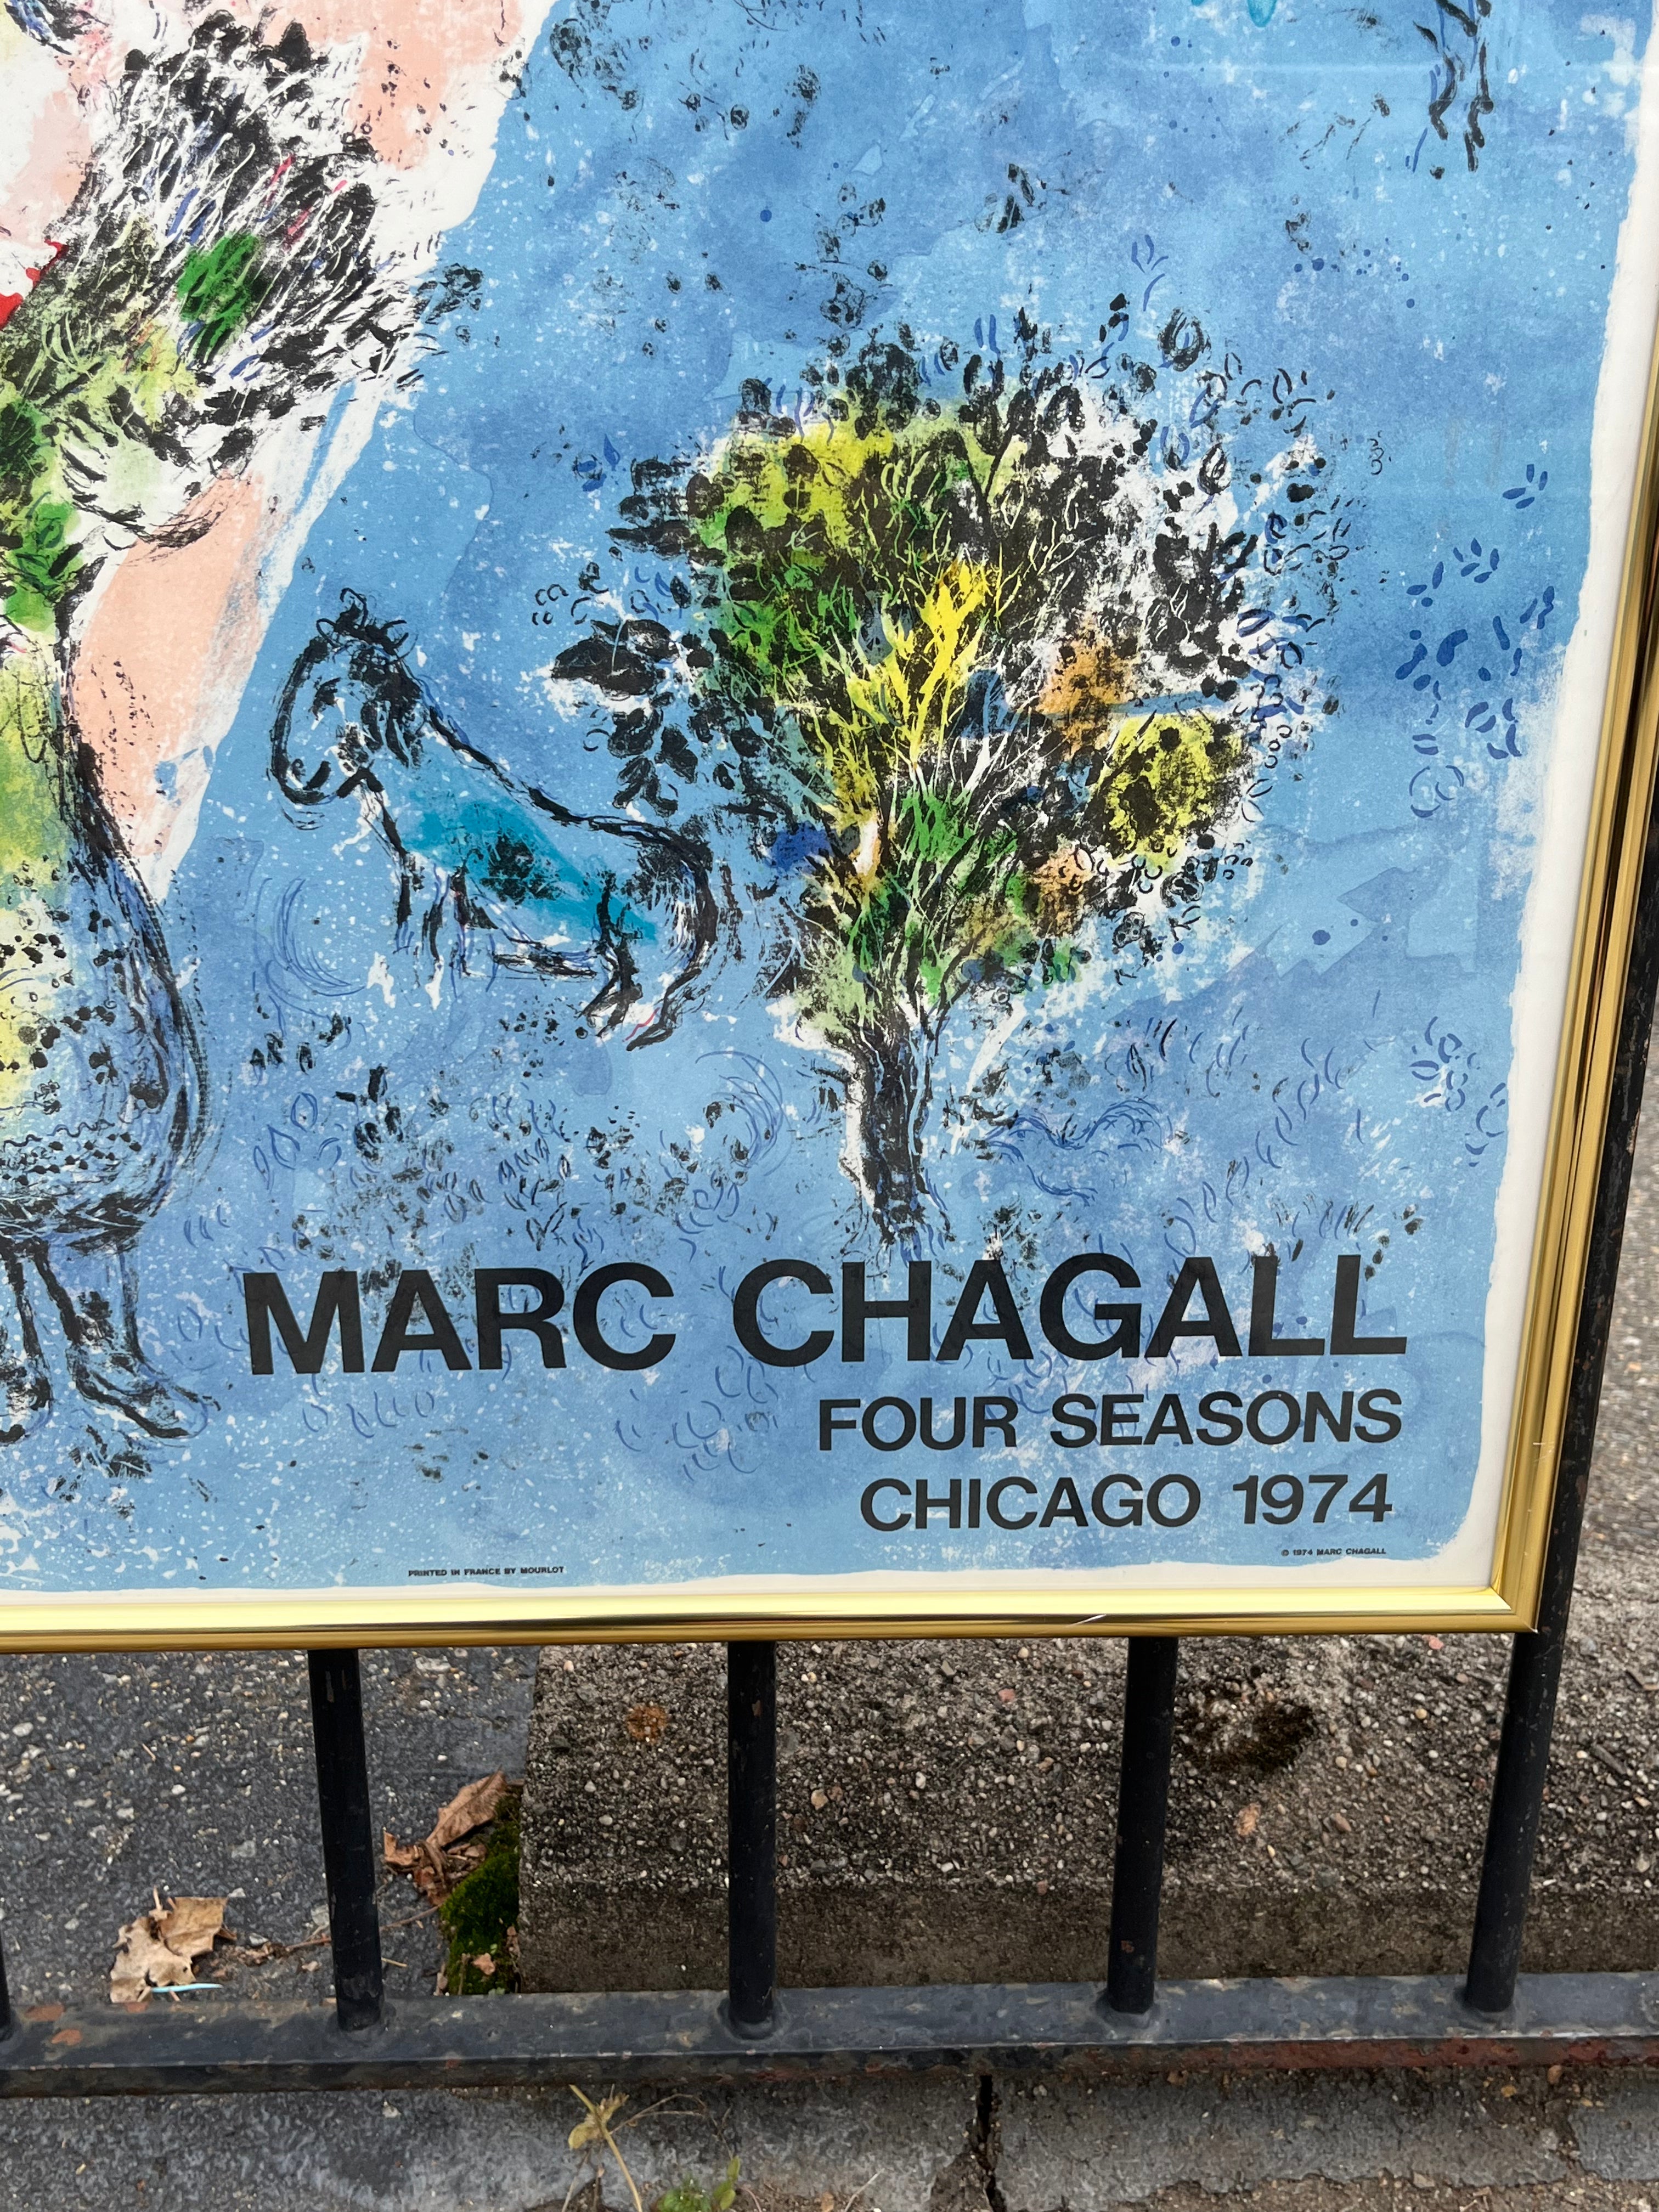 Chagall “Four Seasons” Poster